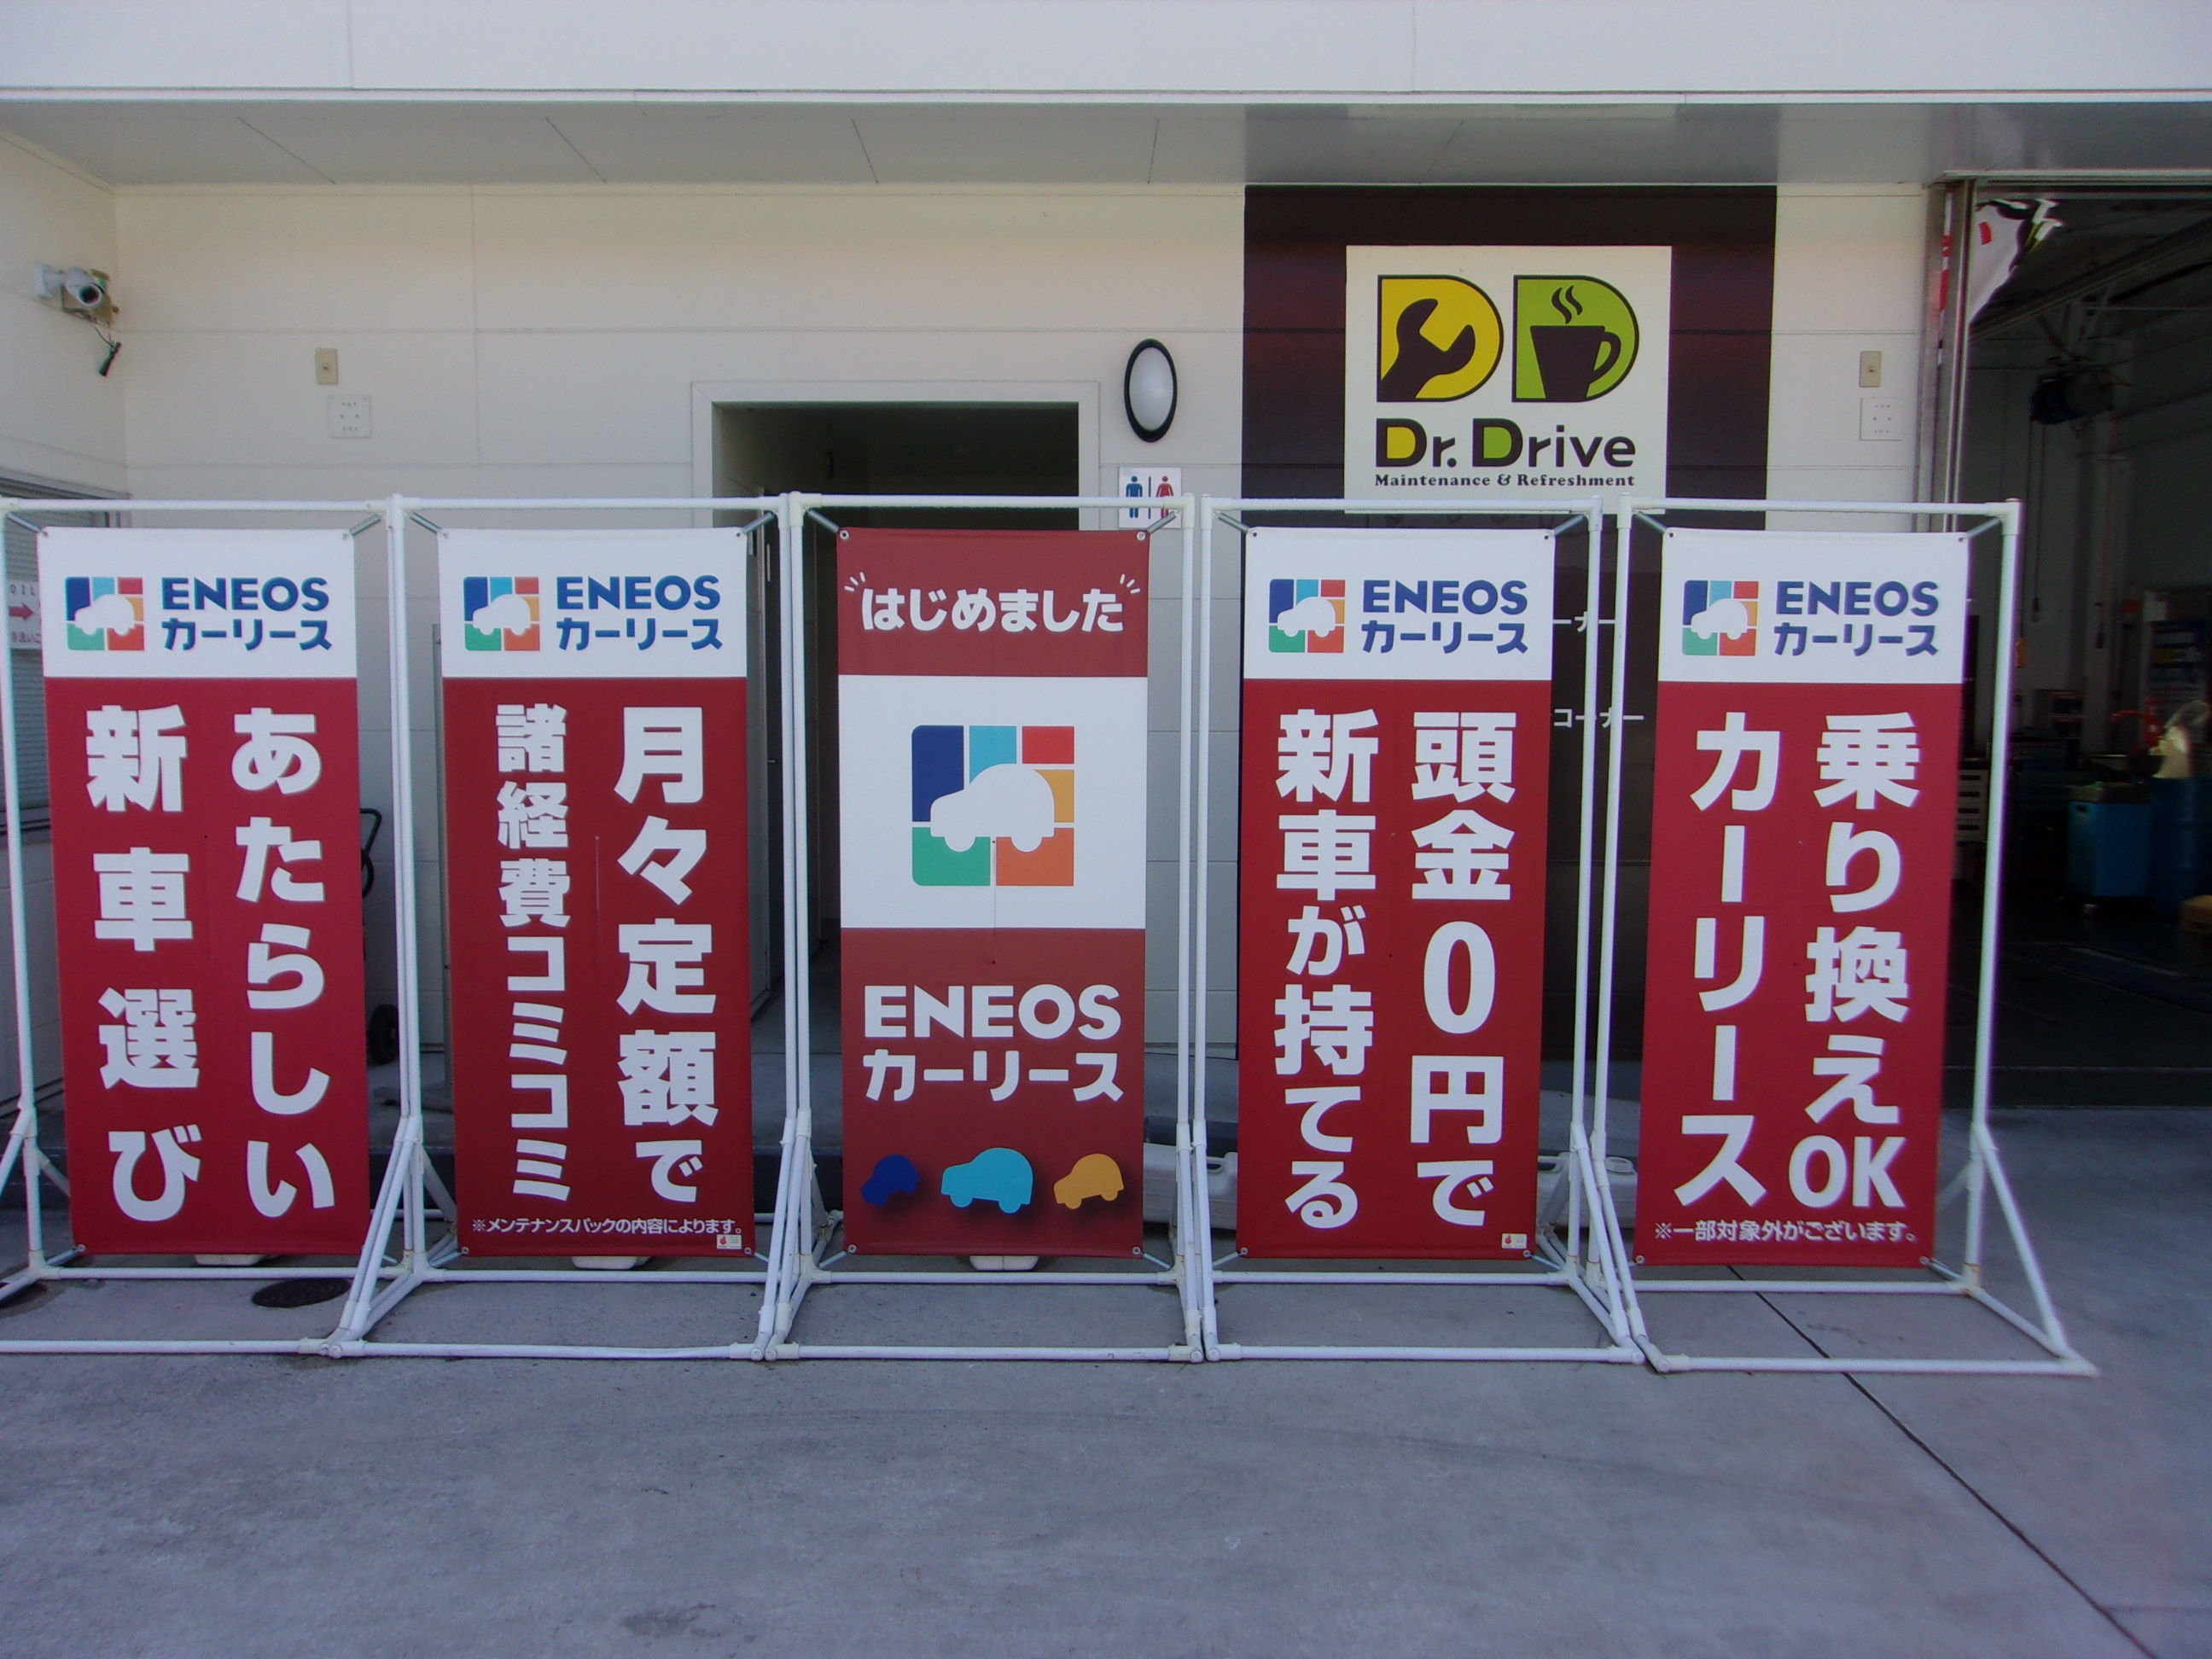 Images ENEOS Dr.Driveセルフ小倉南店(ENEOSフロンティア)